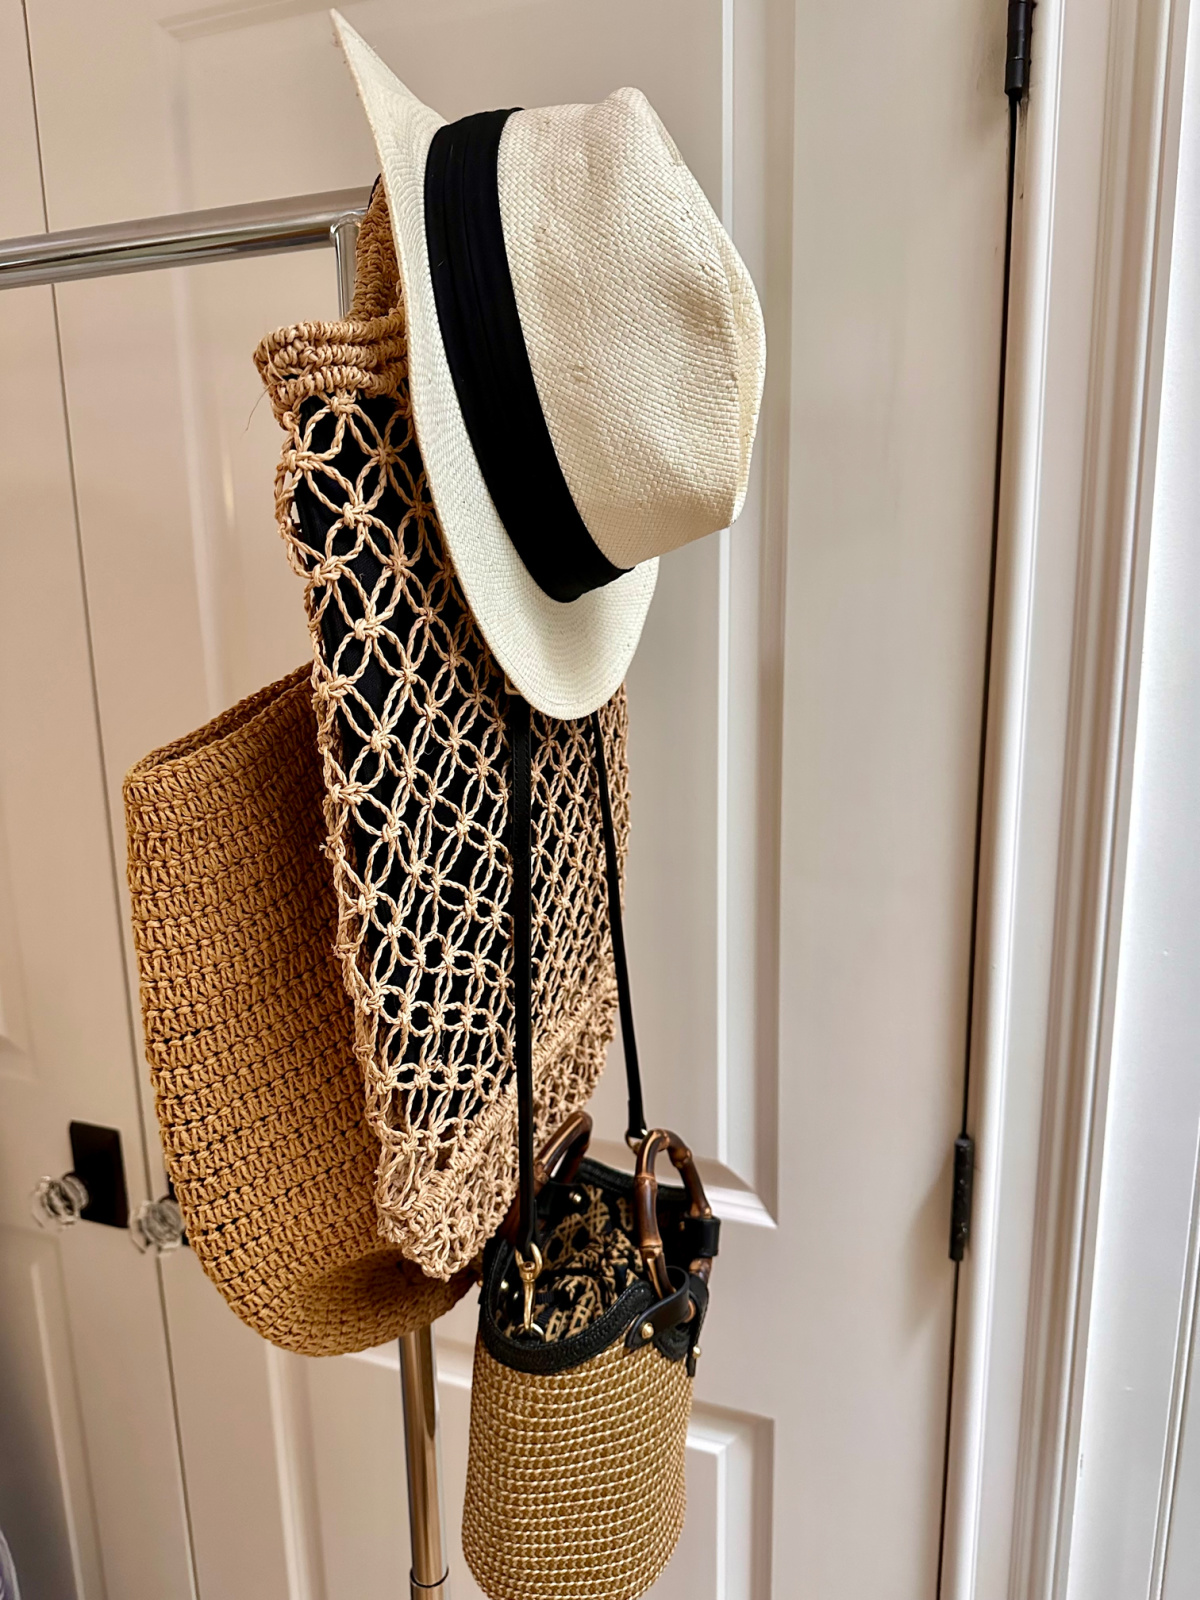 Summer bags and hat on rolling rack.